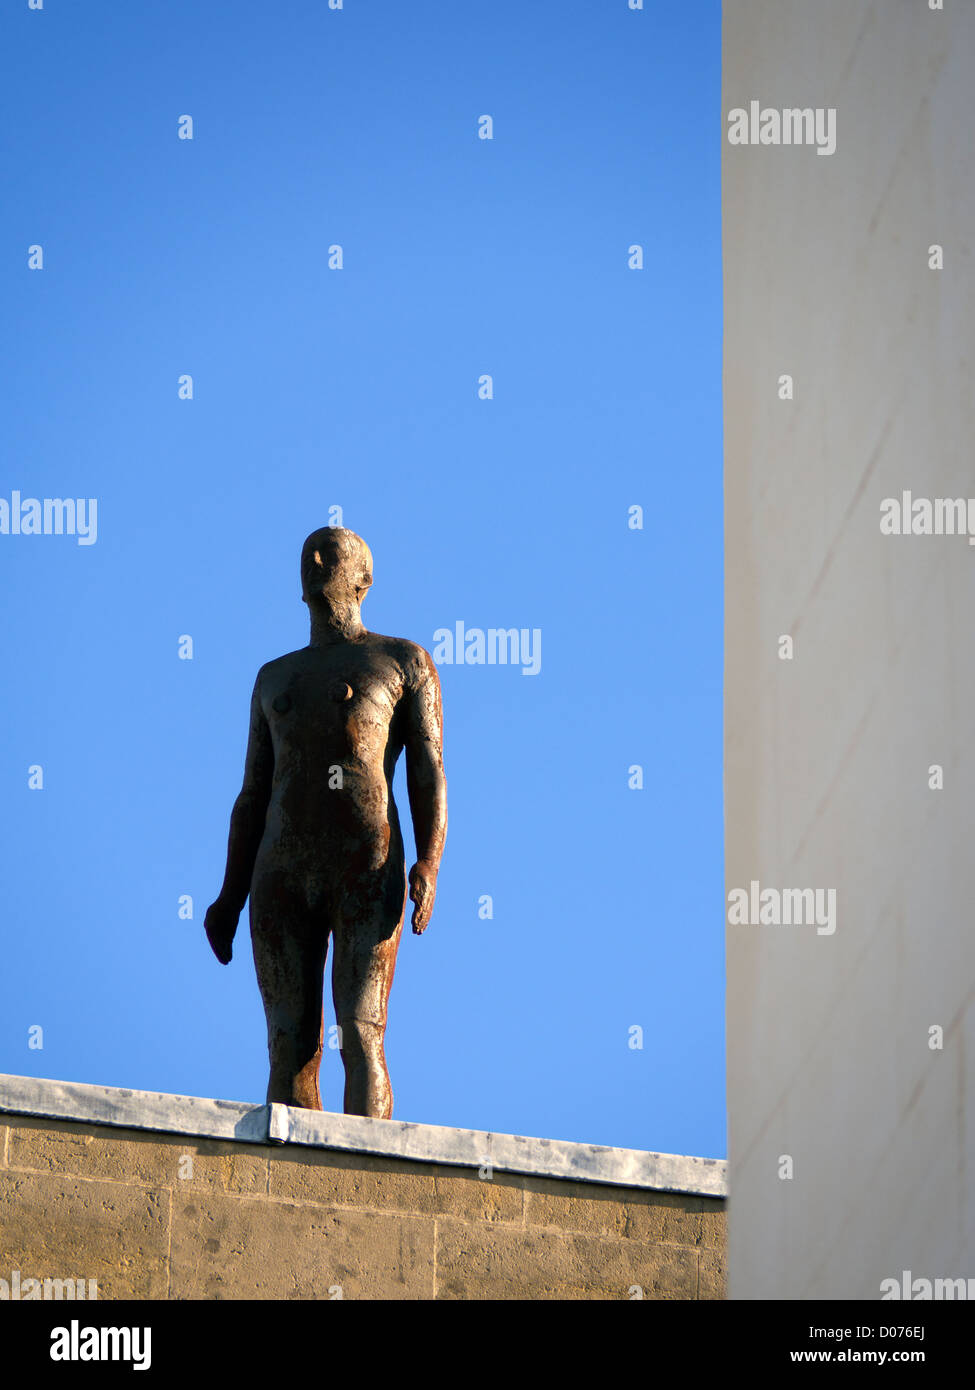 Antony Gormley's iron statue of a man on the roof of Blackwell's bookshop in Broad Street, Oxford 3 Stock Photo